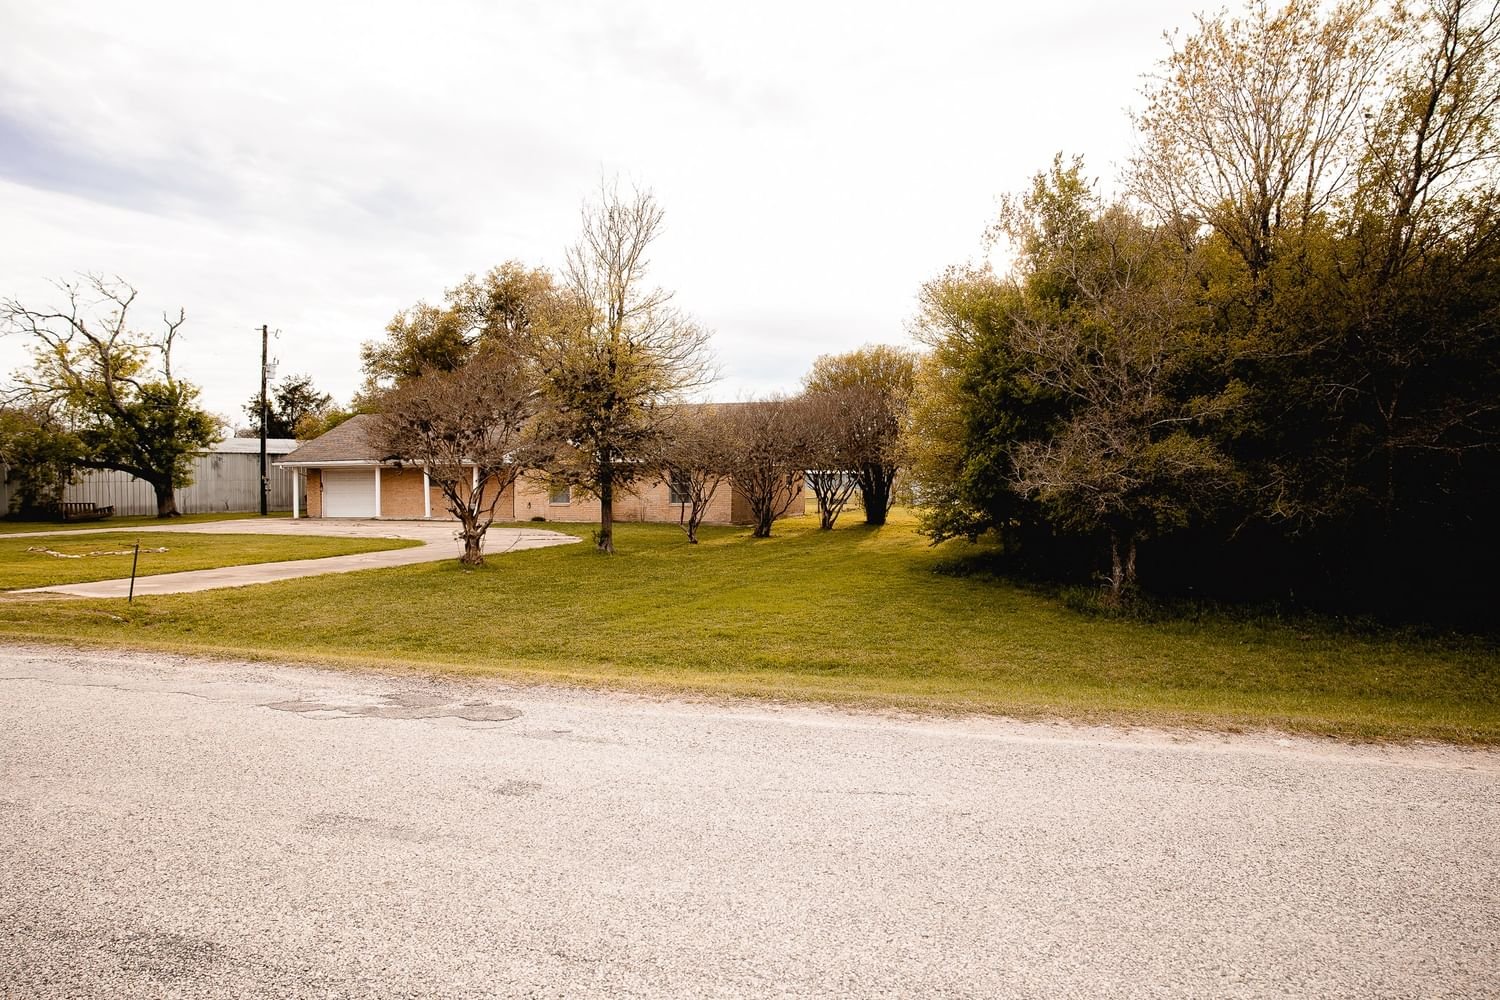 Real estate property located at 9993 Longpoint, Washington, A0036 - A0036 - Cox, James, Burton, TX, US